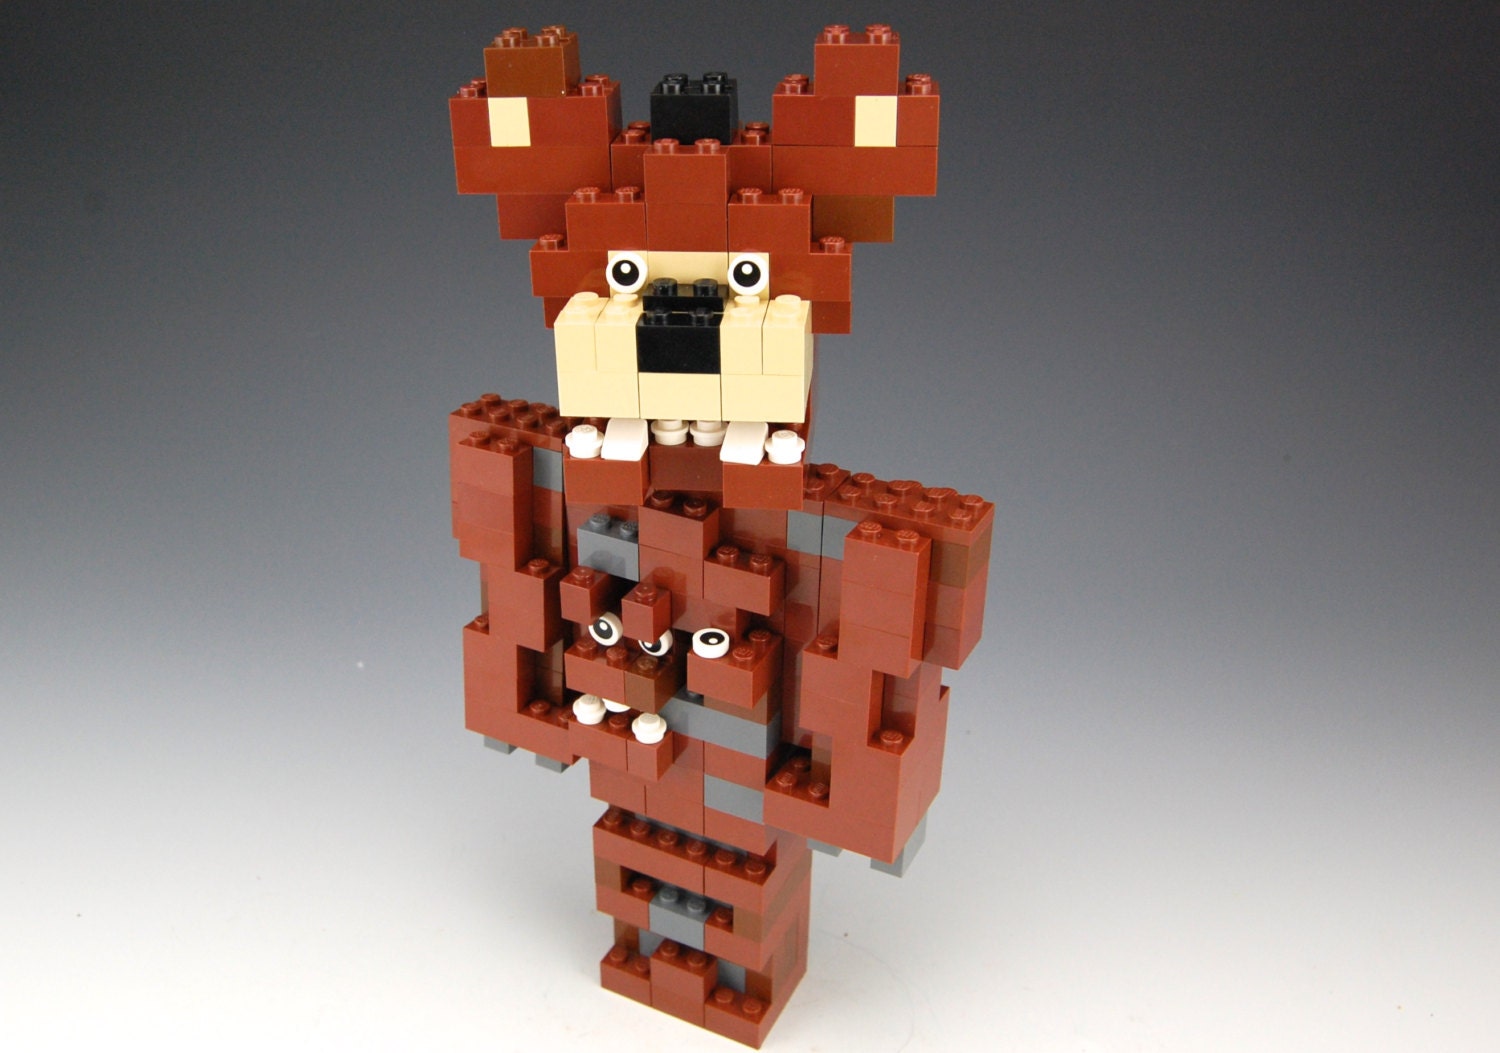 download lego five nights at freddys 4 for free